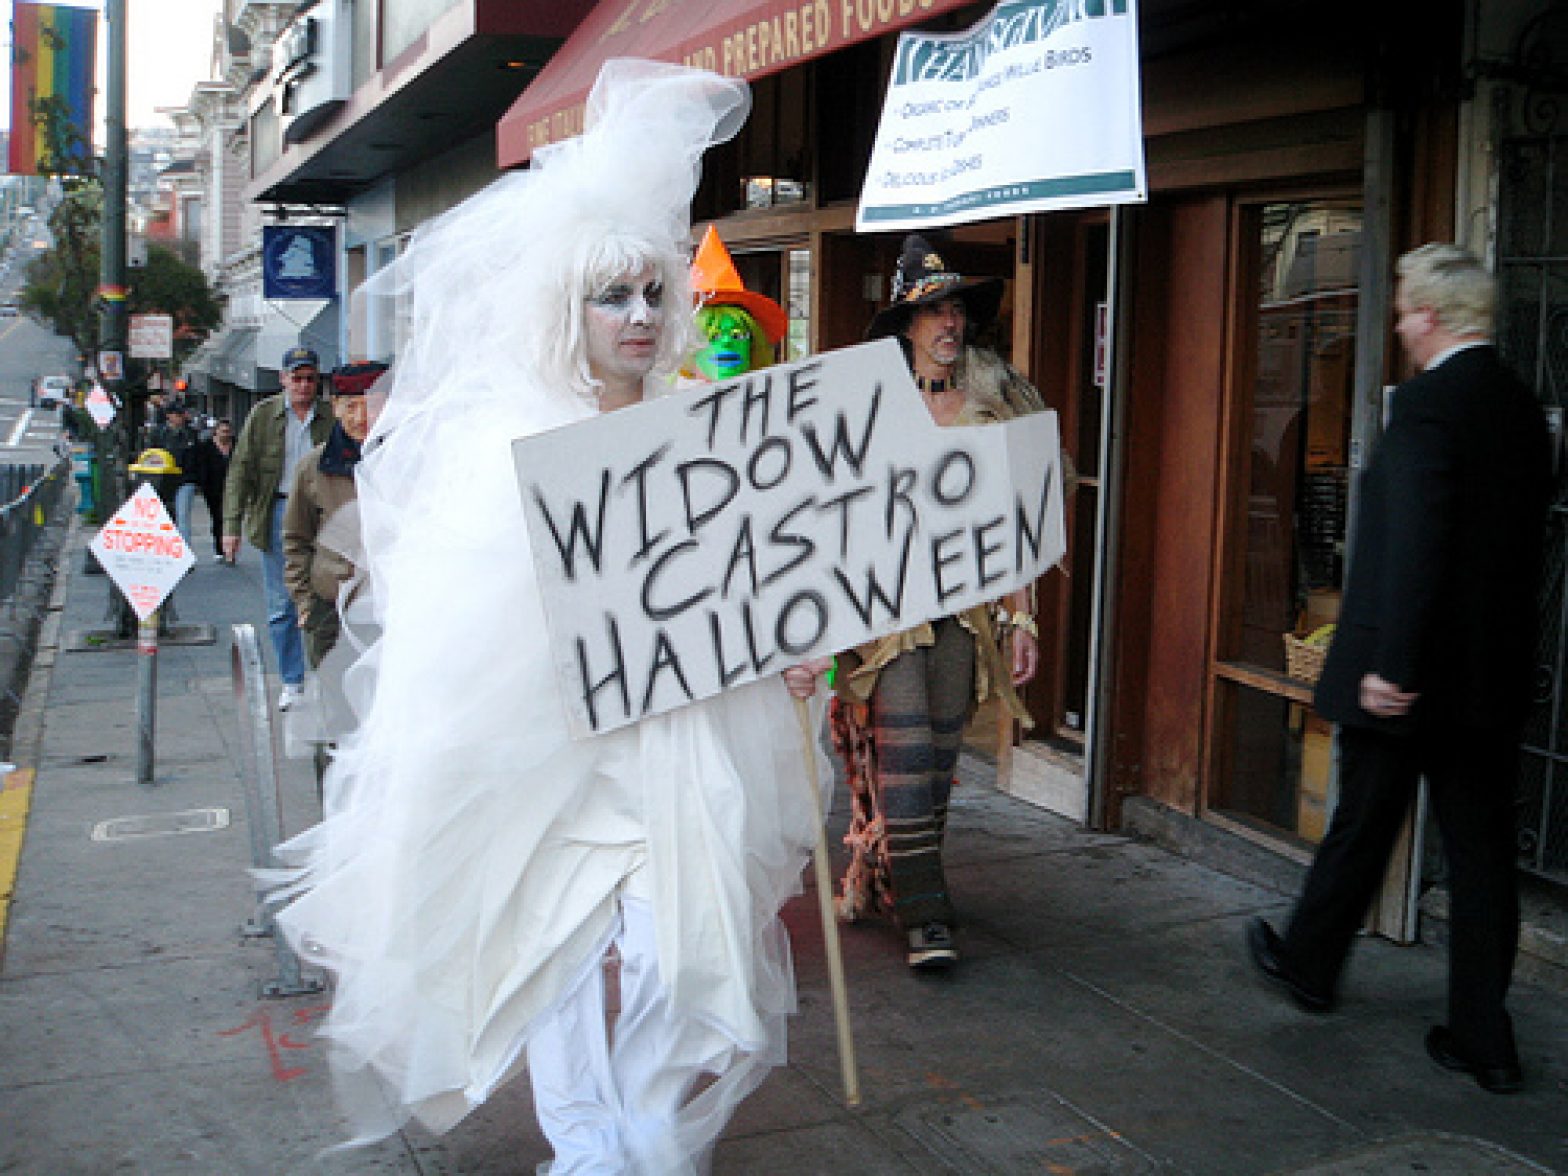 ‘Home for Halloween’ seeks to keep street celebration out of the Castro